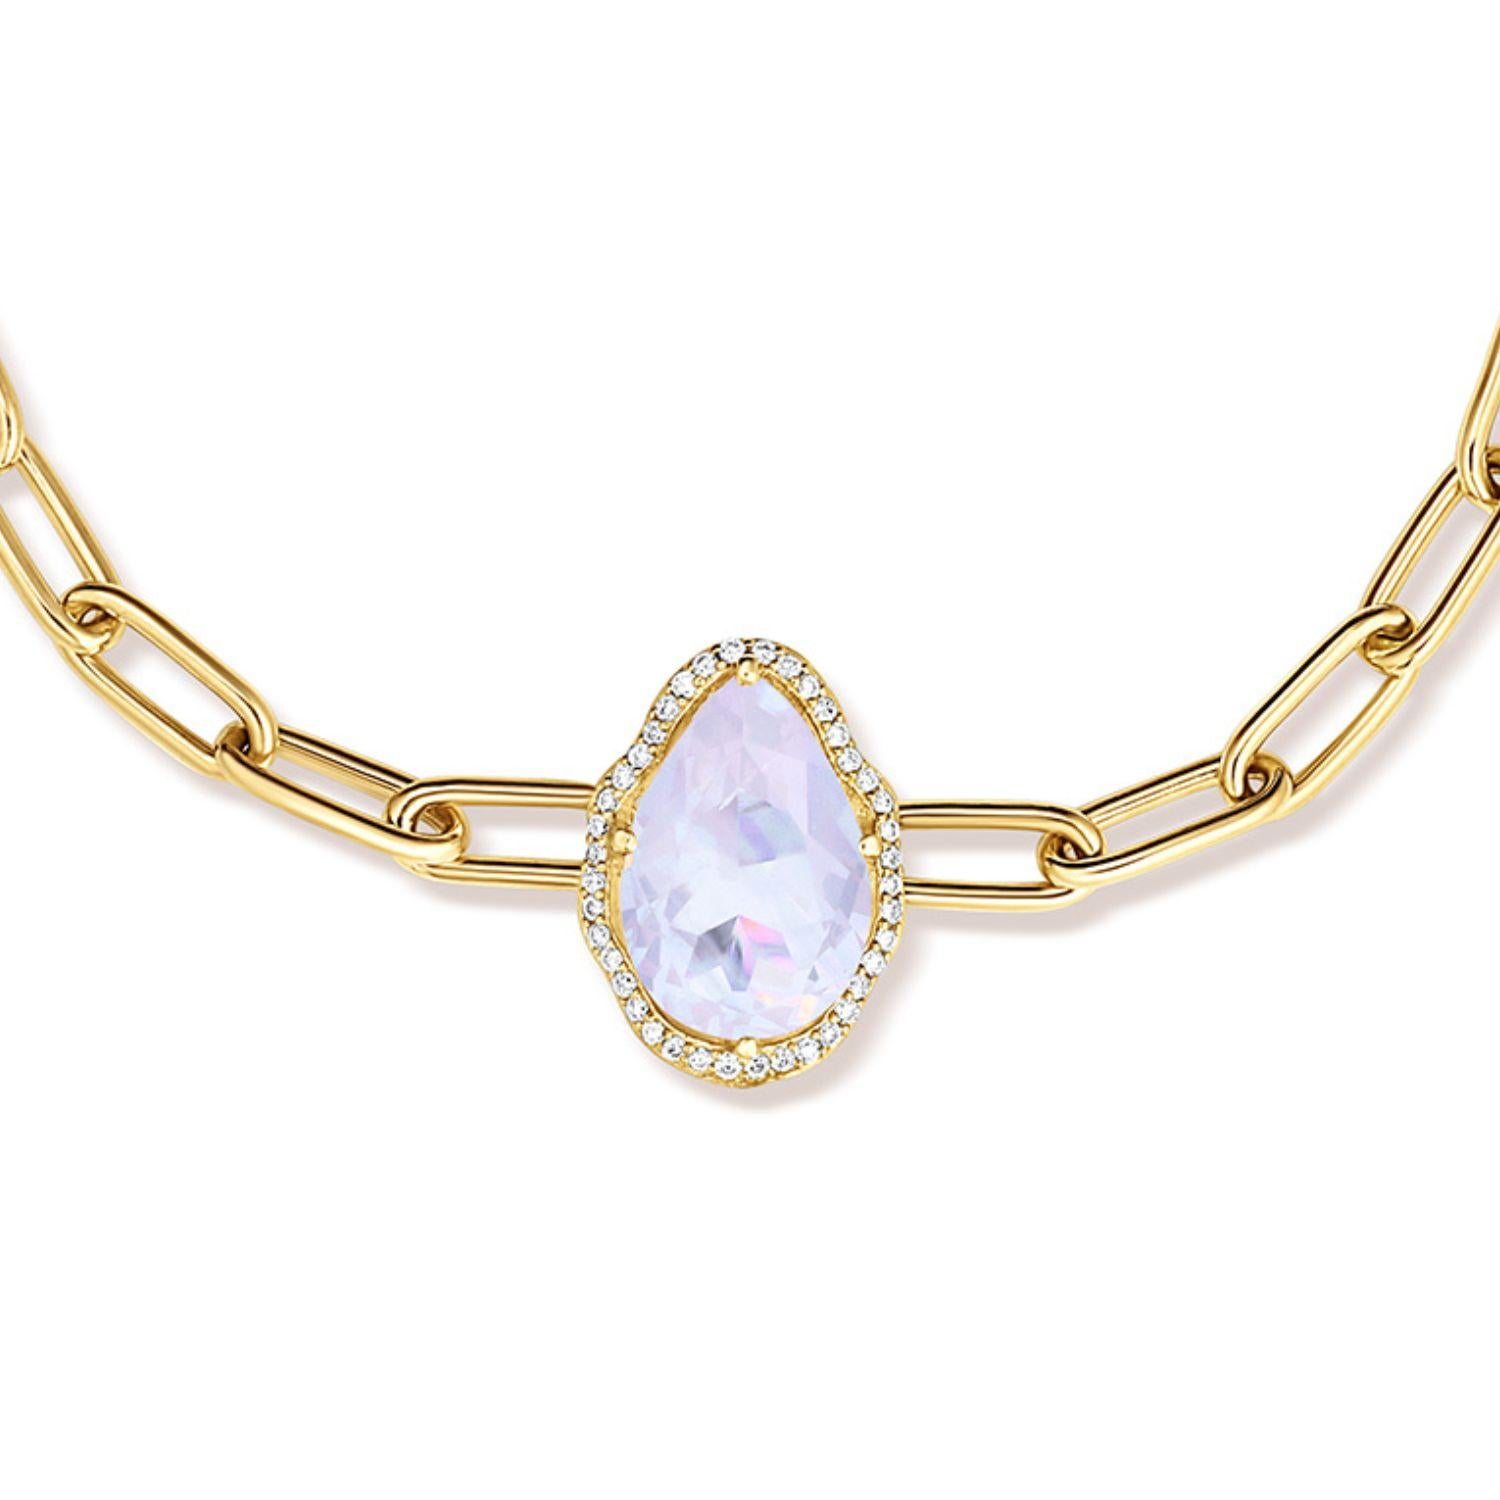 Glow Bracelet. 18K yellow gold (750/1000), with a 3.52 carat pear-cut lavender quartz and 0.1 carats of round brilliant-cut diamonds. 18K yellow gold chain with adjustable length of 17 cm.